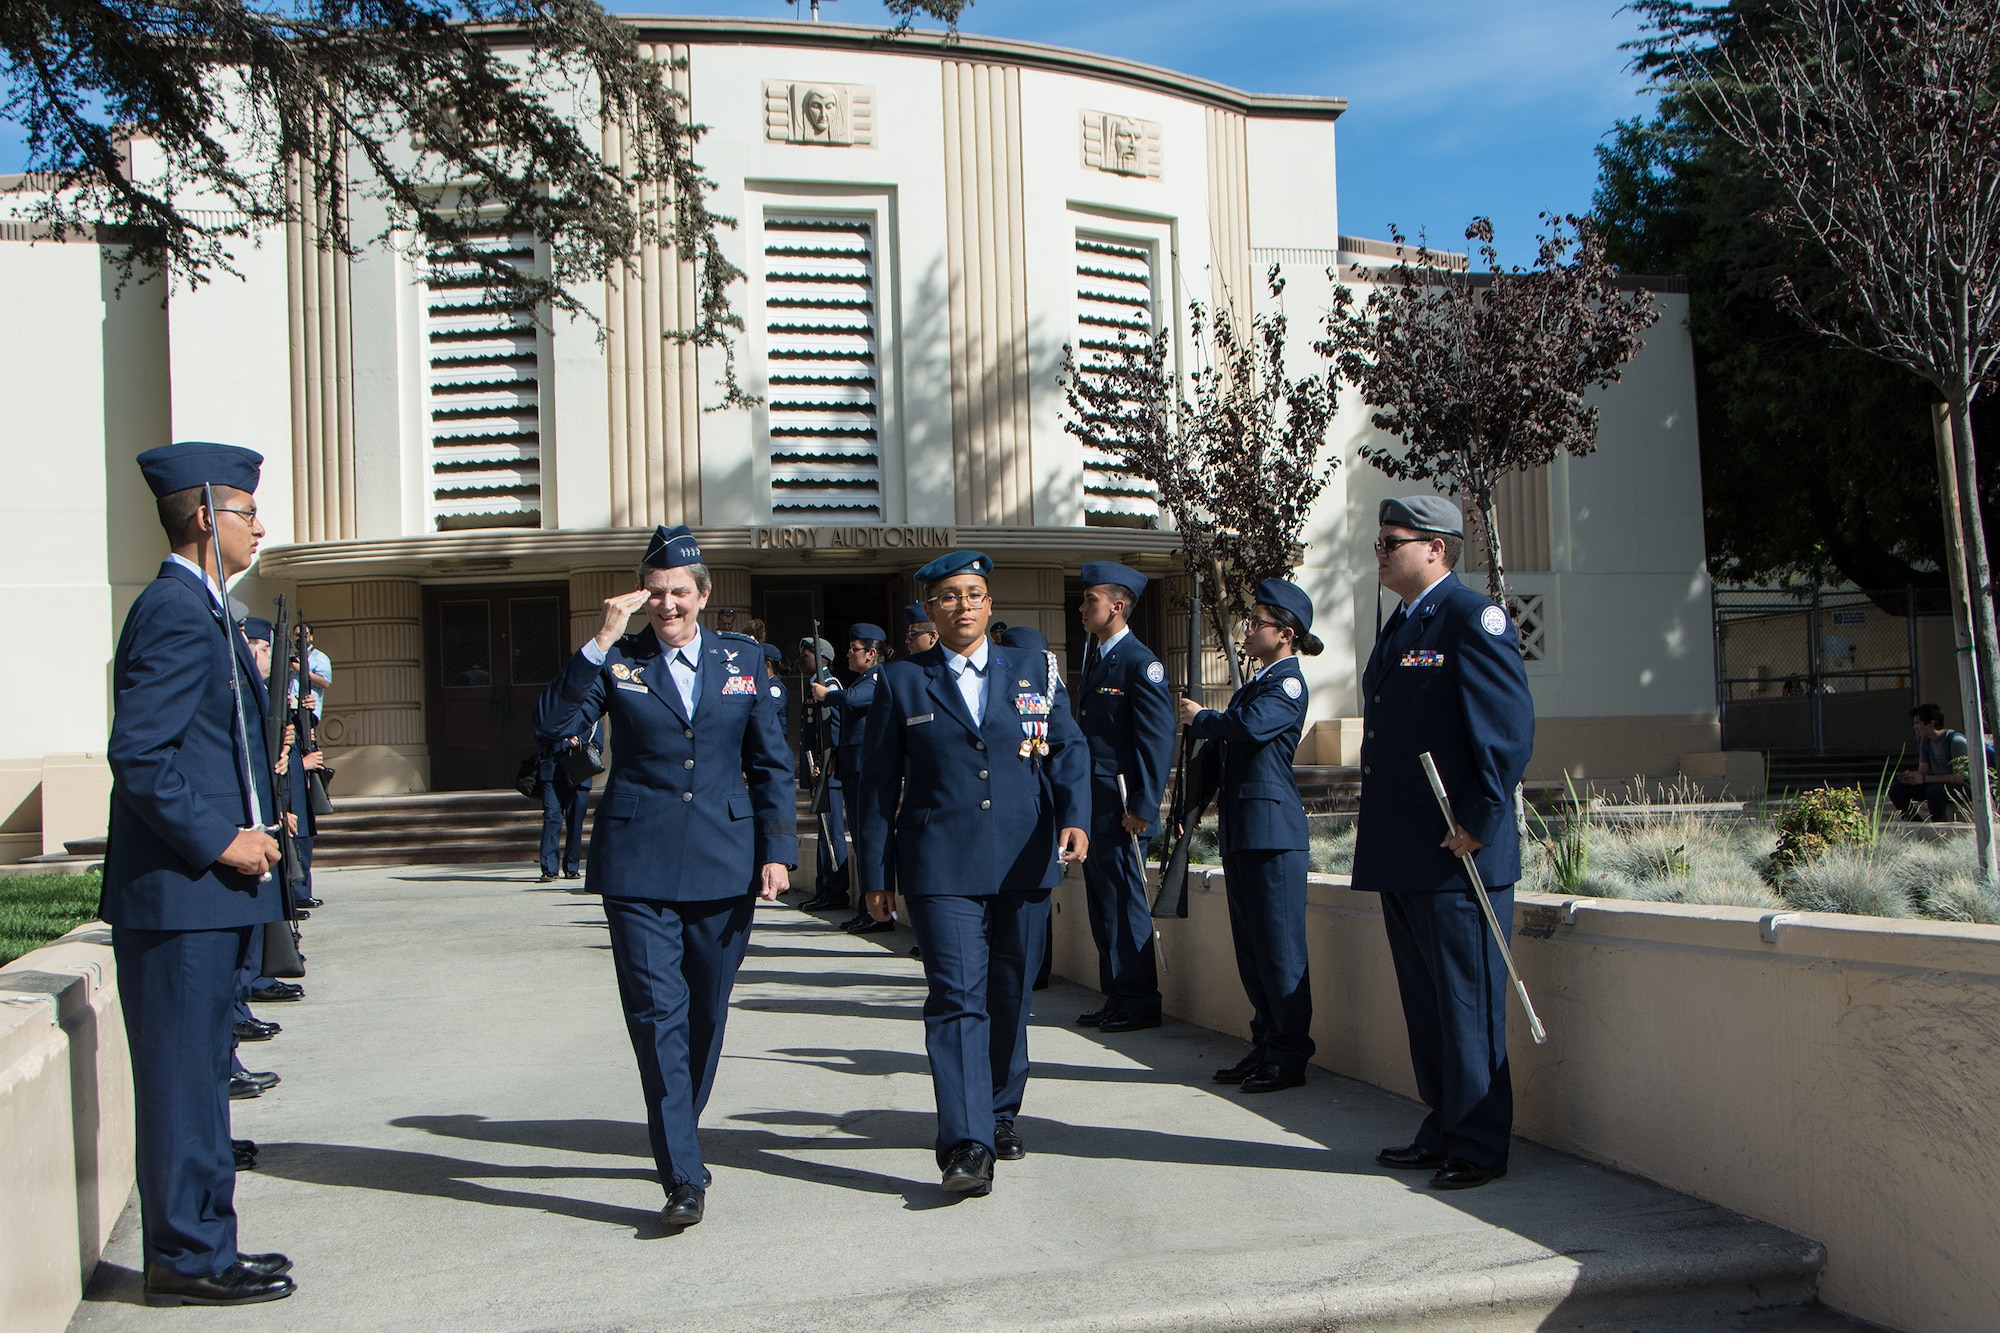 Air Force Materiel Command Commander Gen. Ellen M. Pawlikowski visits with Air Force Junior ROTC Unit CA-956 during her visit to San Pedro High School in Los Angeles, Oct. 7, 2016. The general delivered the keynote speech at the school's kickoff of the National Math and Science Initiative's College Readiness Program. The program focuses on science, technology, engineering and mathematics classes. (Courtesy photo)